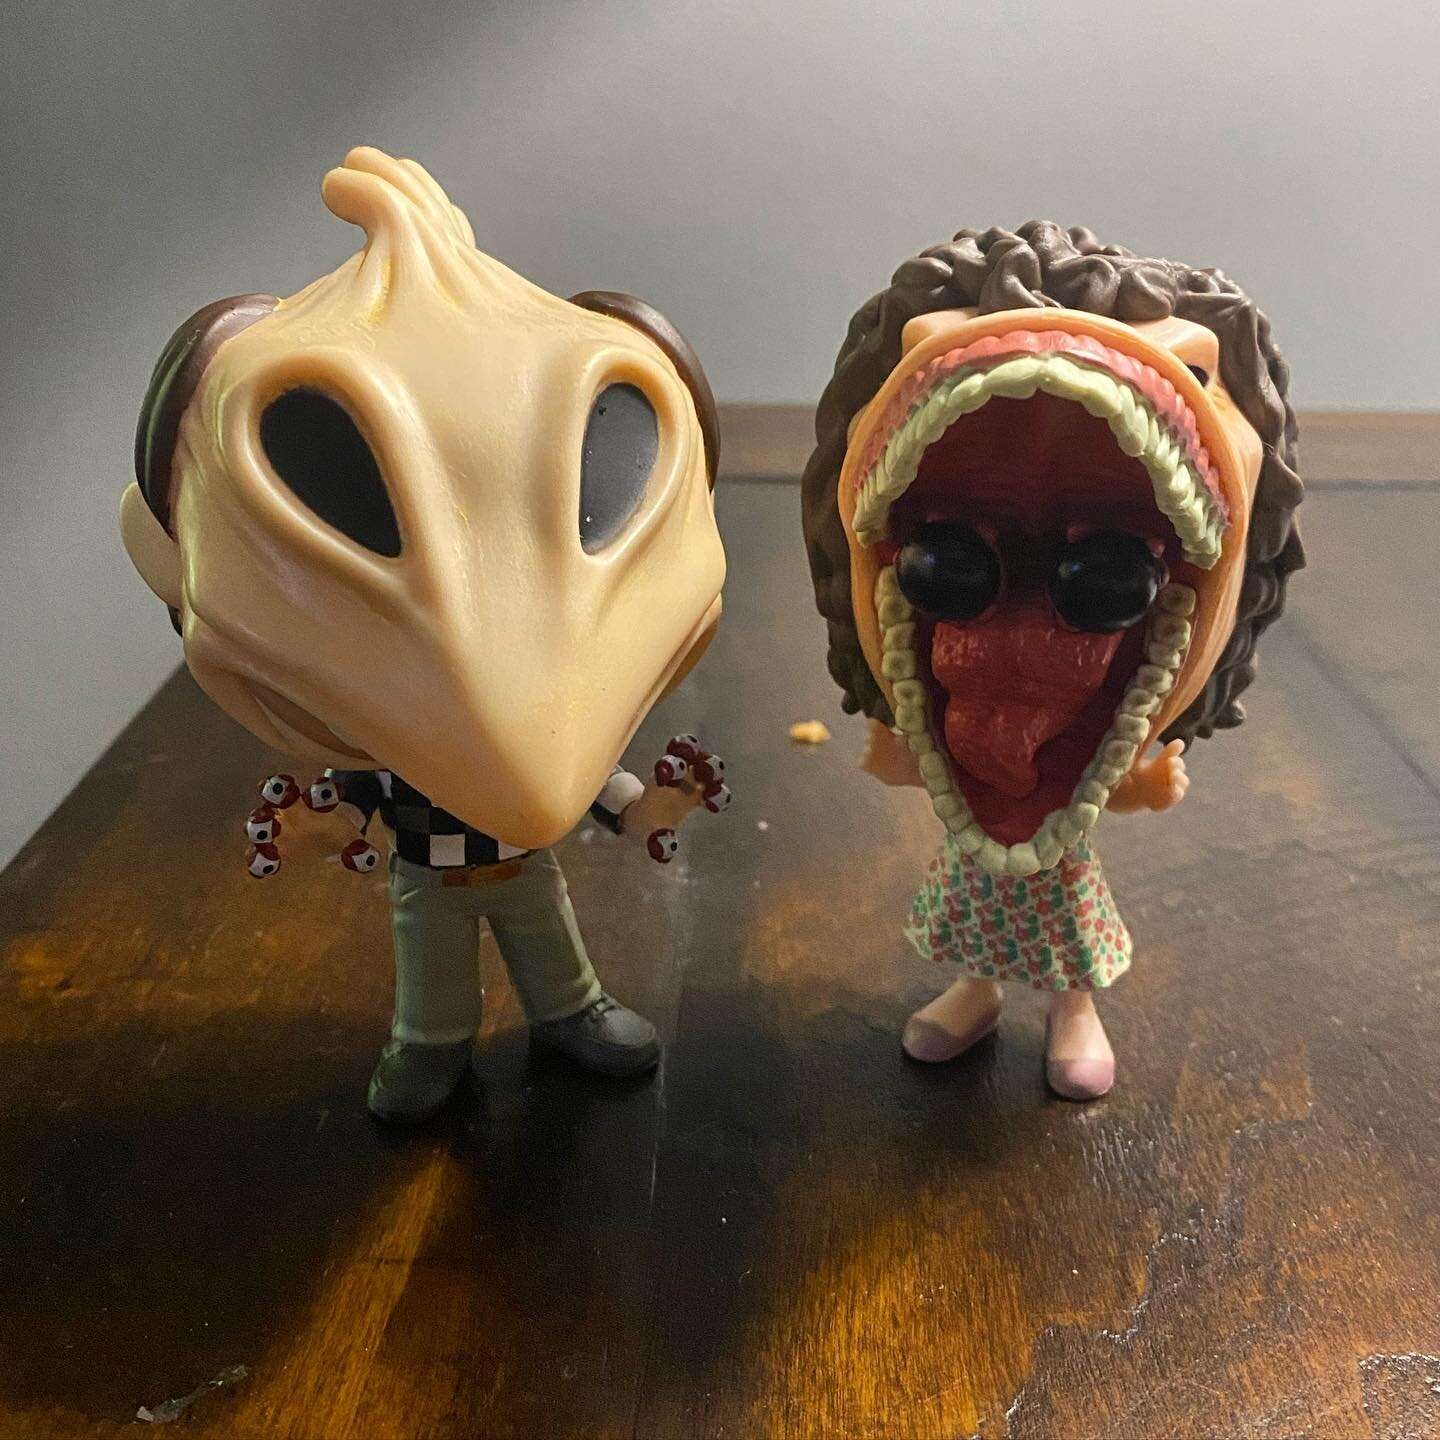 I preordered these to put at my work desk in February, I think. #wompwomp #beetlejuice #funkopop